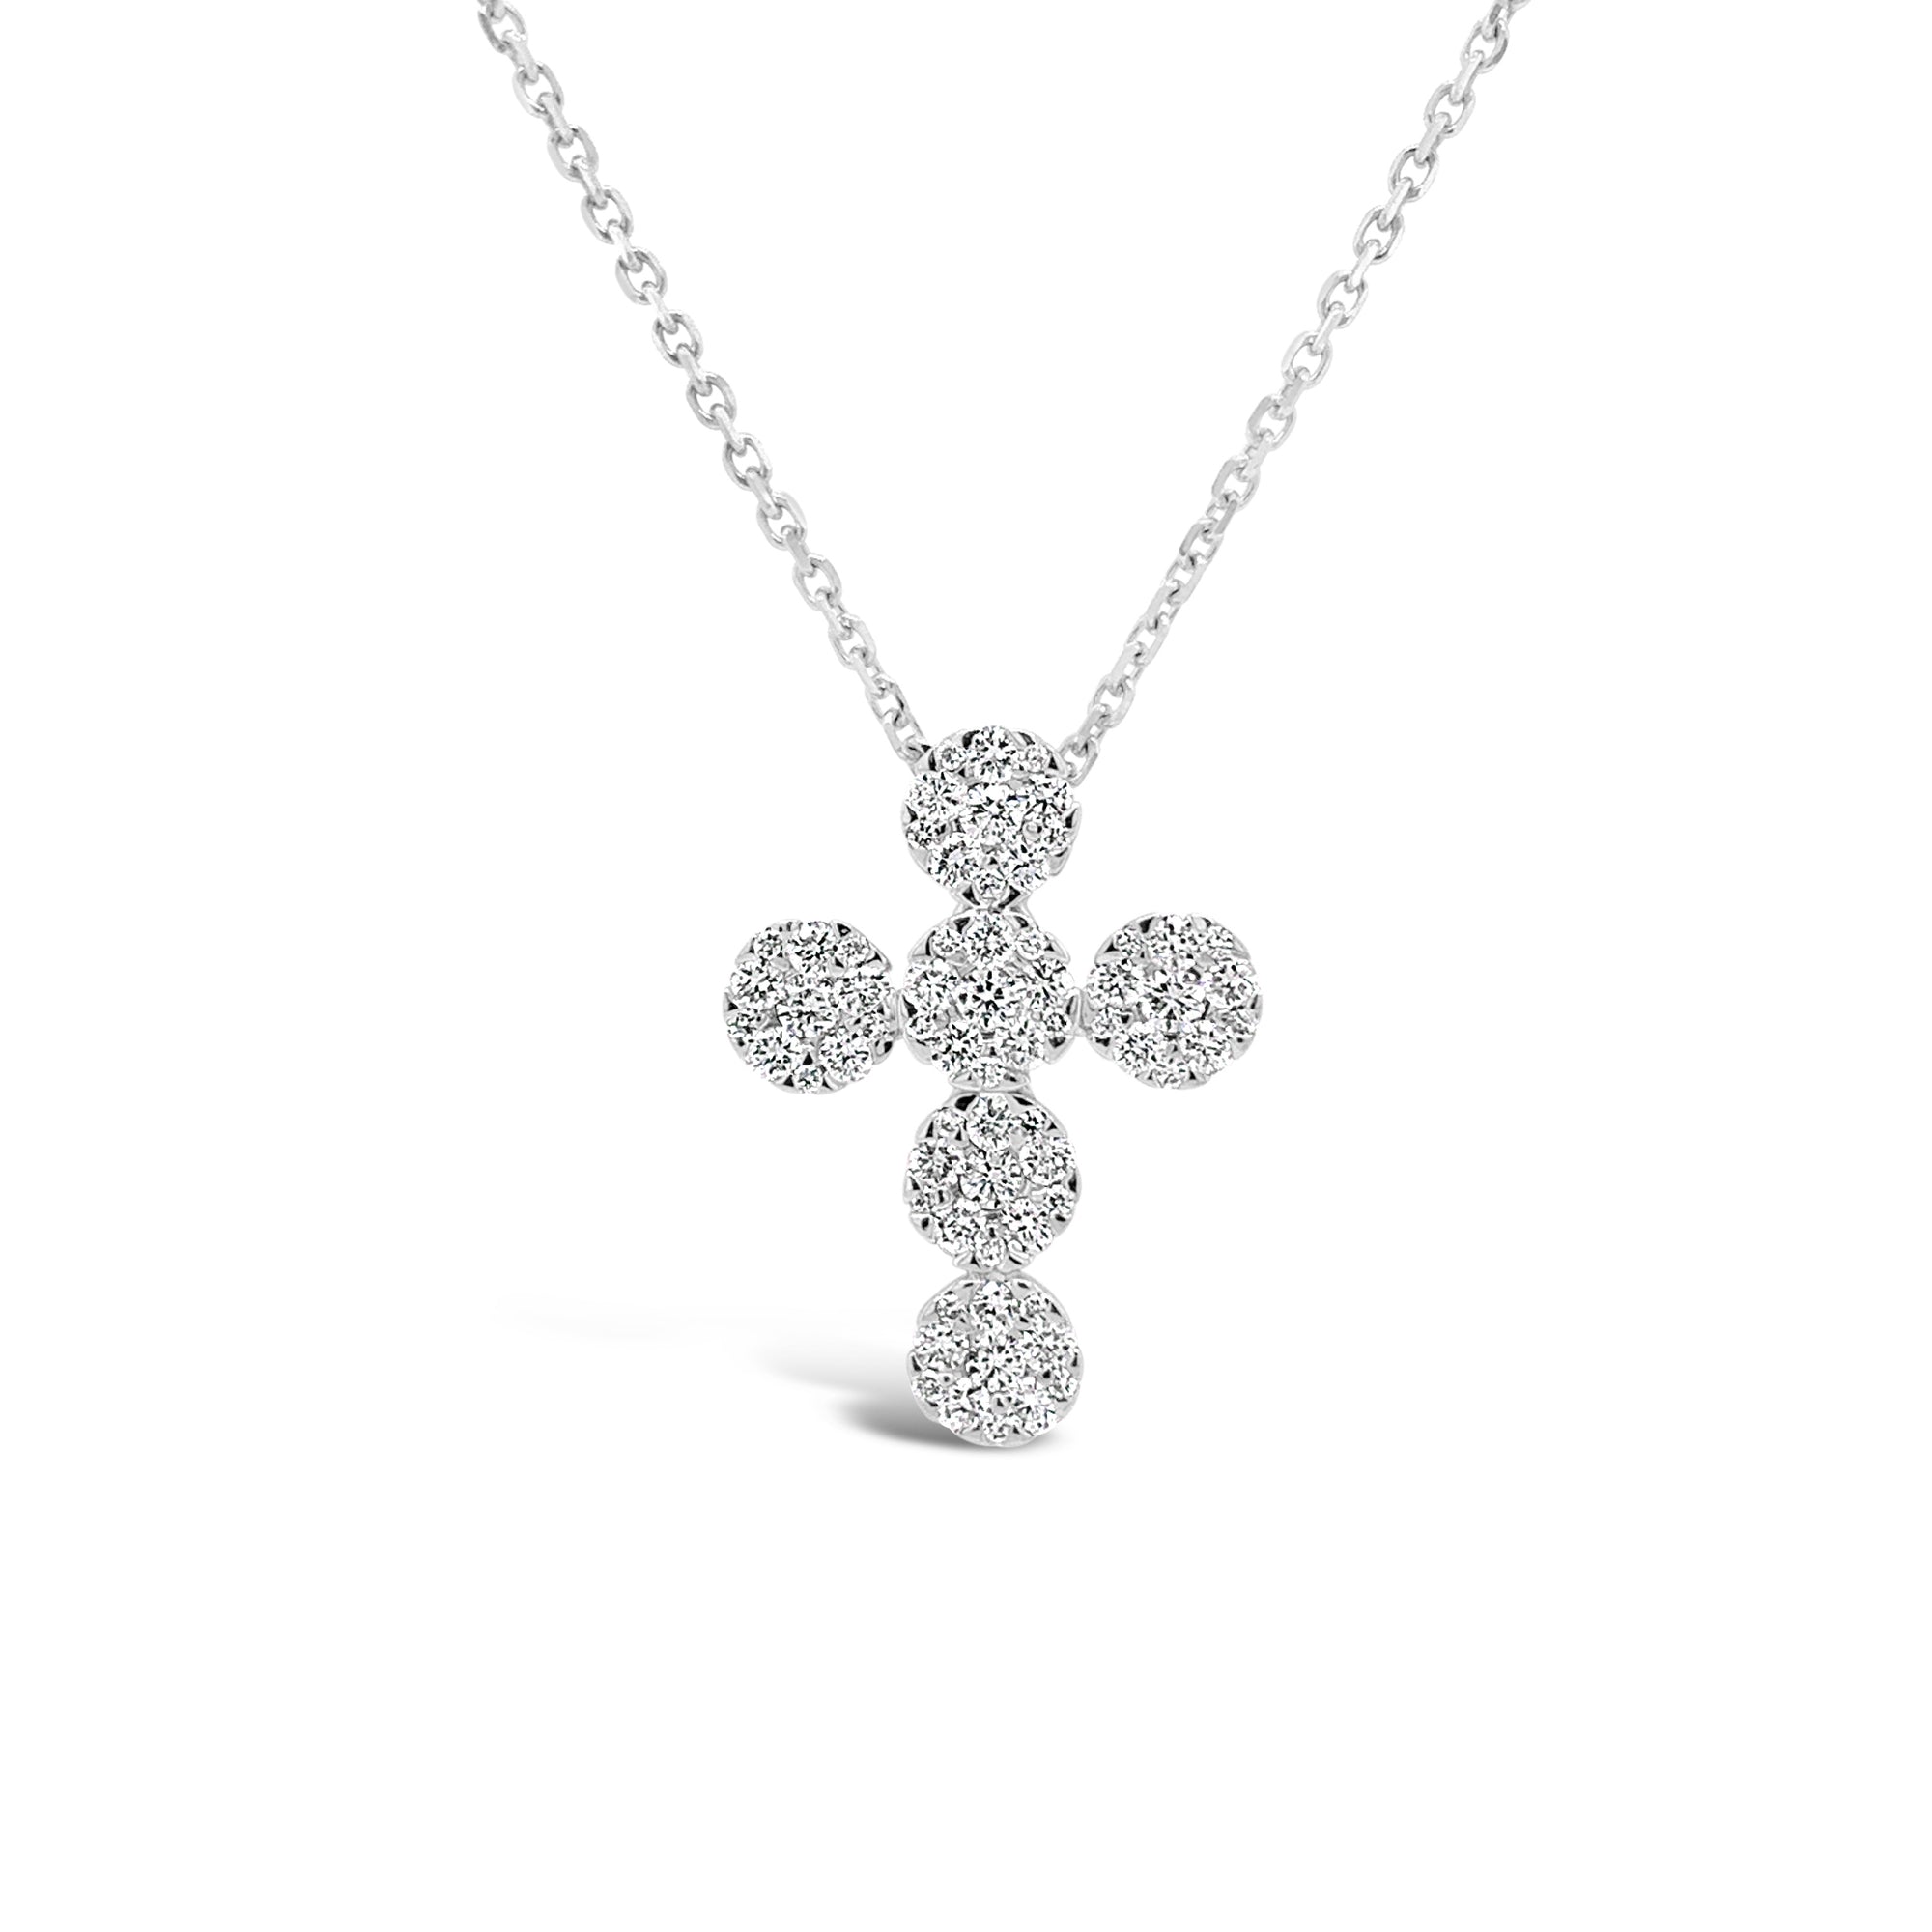 Pave Diamond Rounded Cross Pendant Necklace  18K weighing 1.13 GR  66 round stones .40 carats